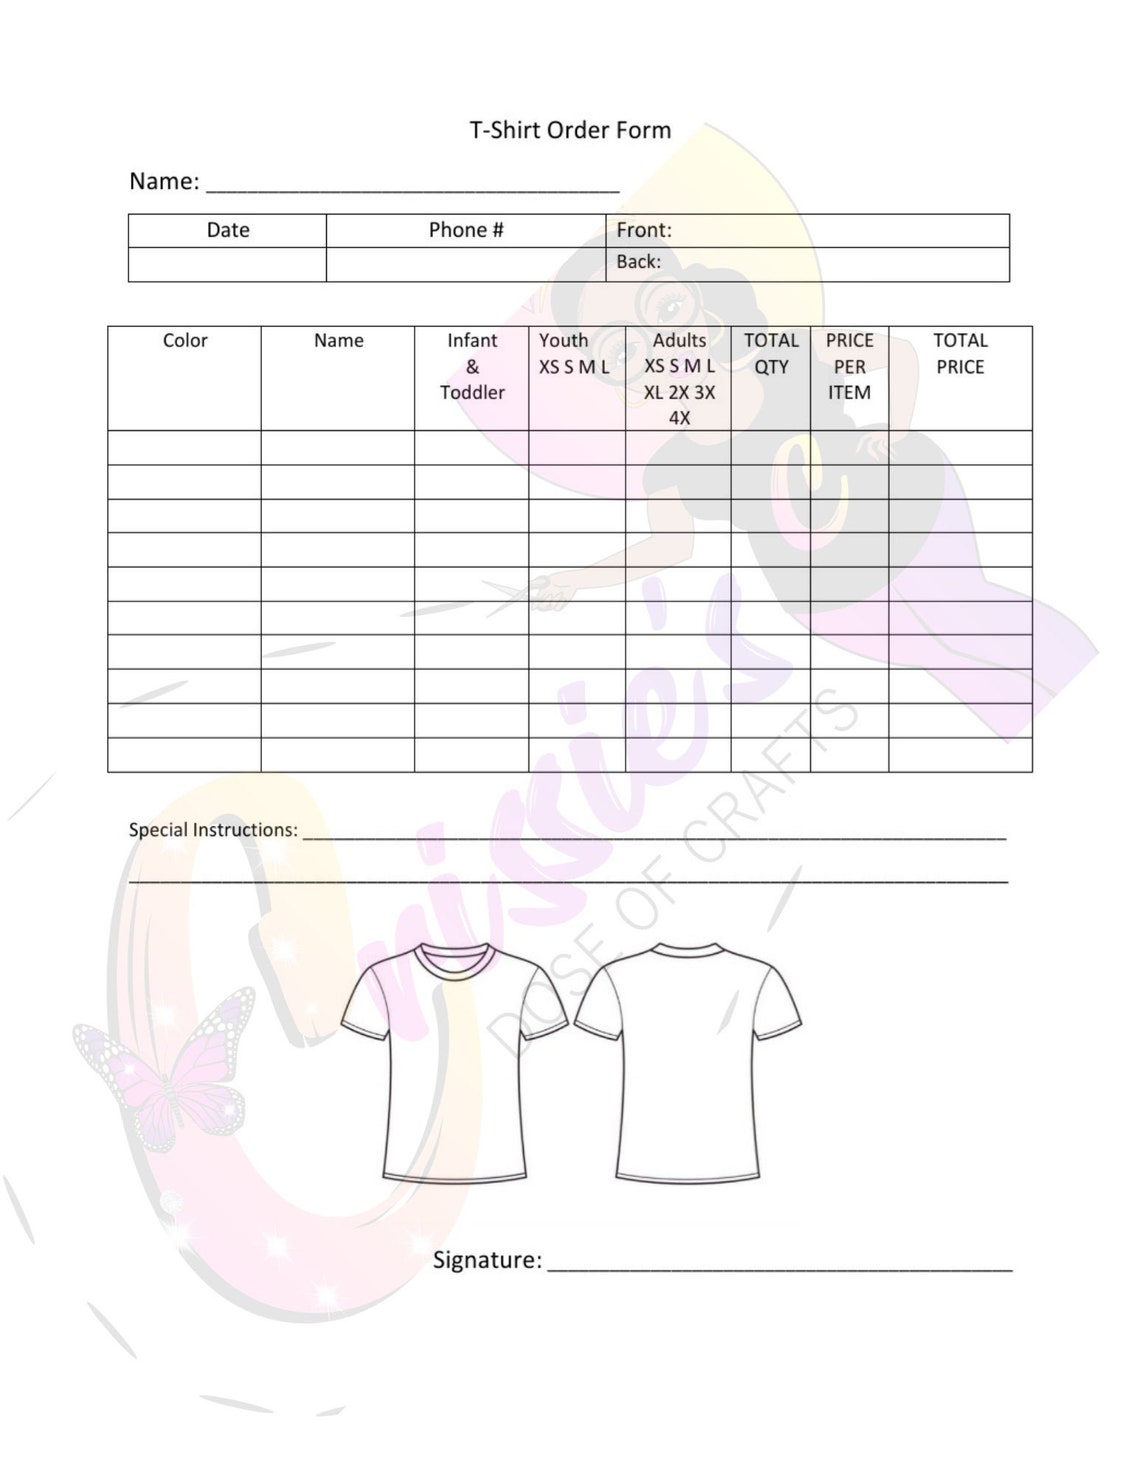 t-shirt-order-form-template-printable